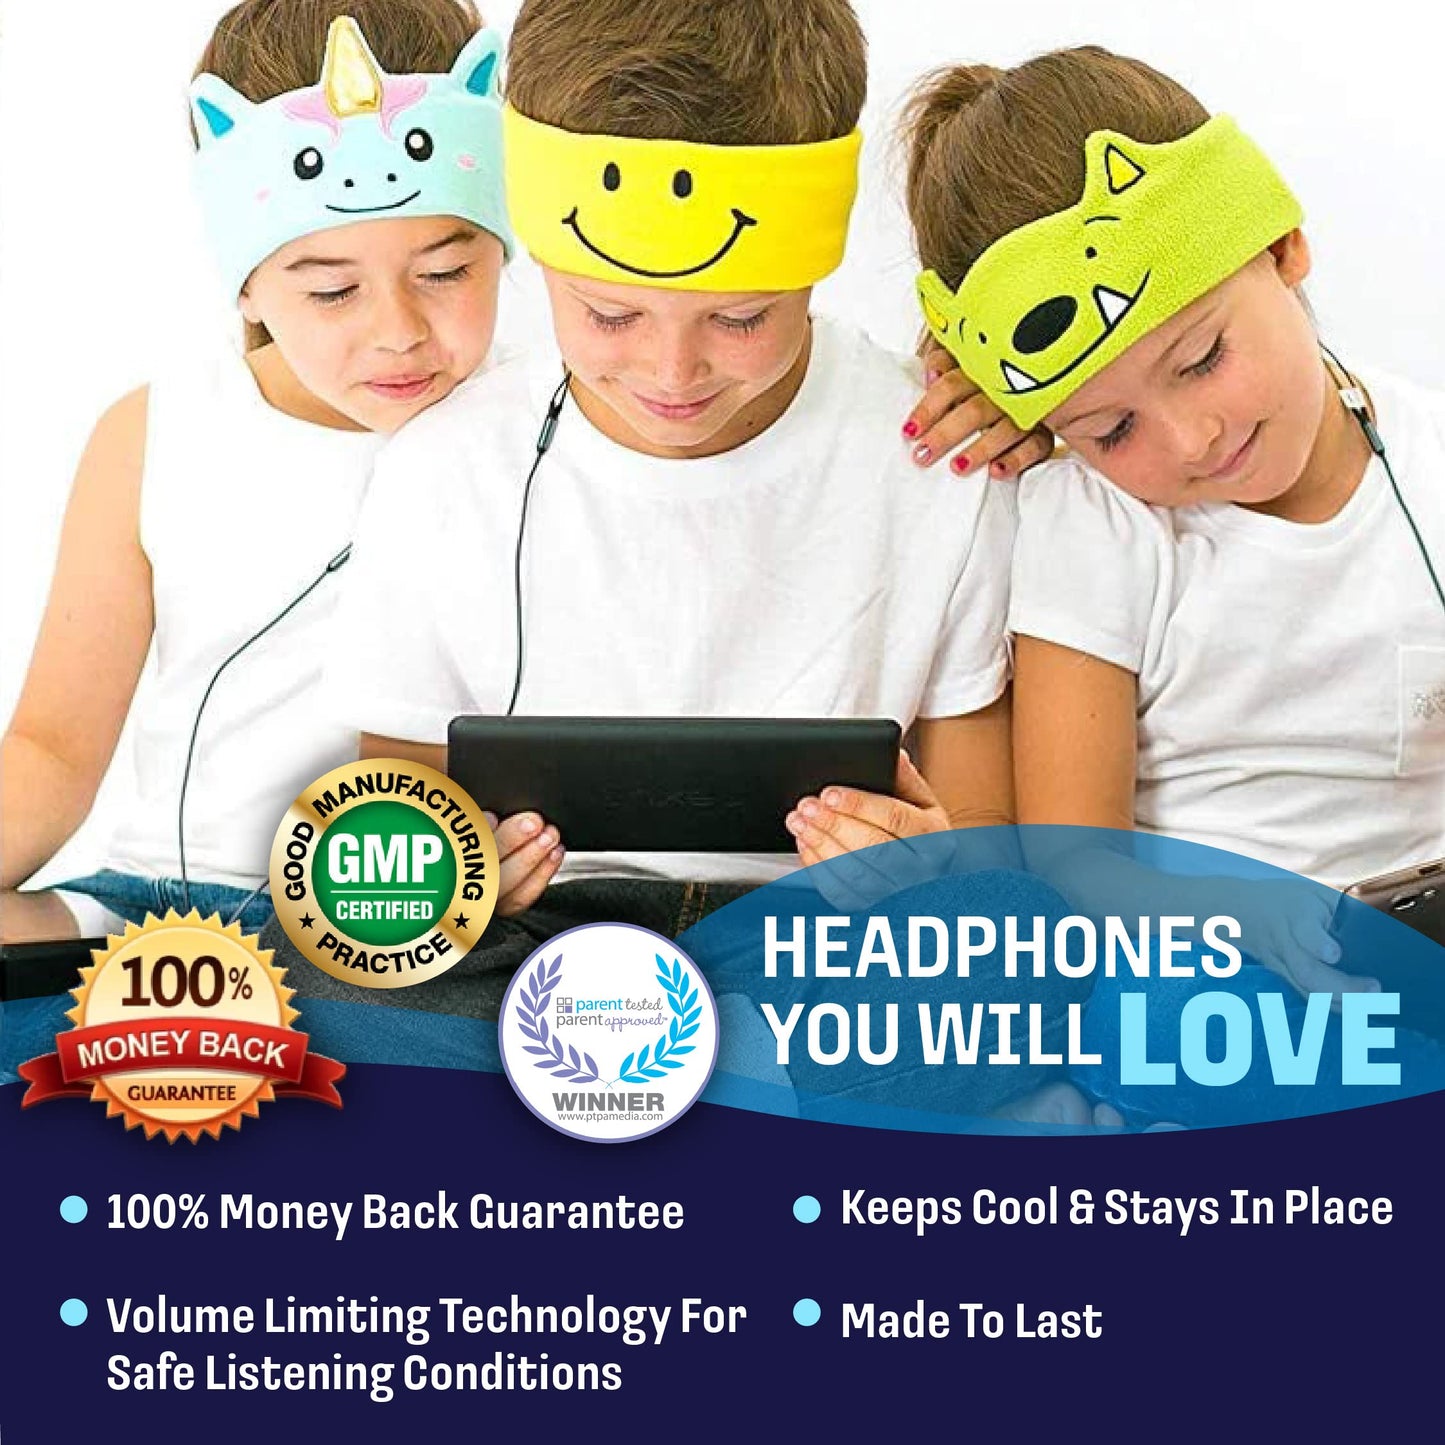 CozyPhones Over The Ear Headband Headphones - Kids Headphones Volume Limited with Thin Speakers & Super Soft Stretchy Headband - Green Frog - Opticdeals